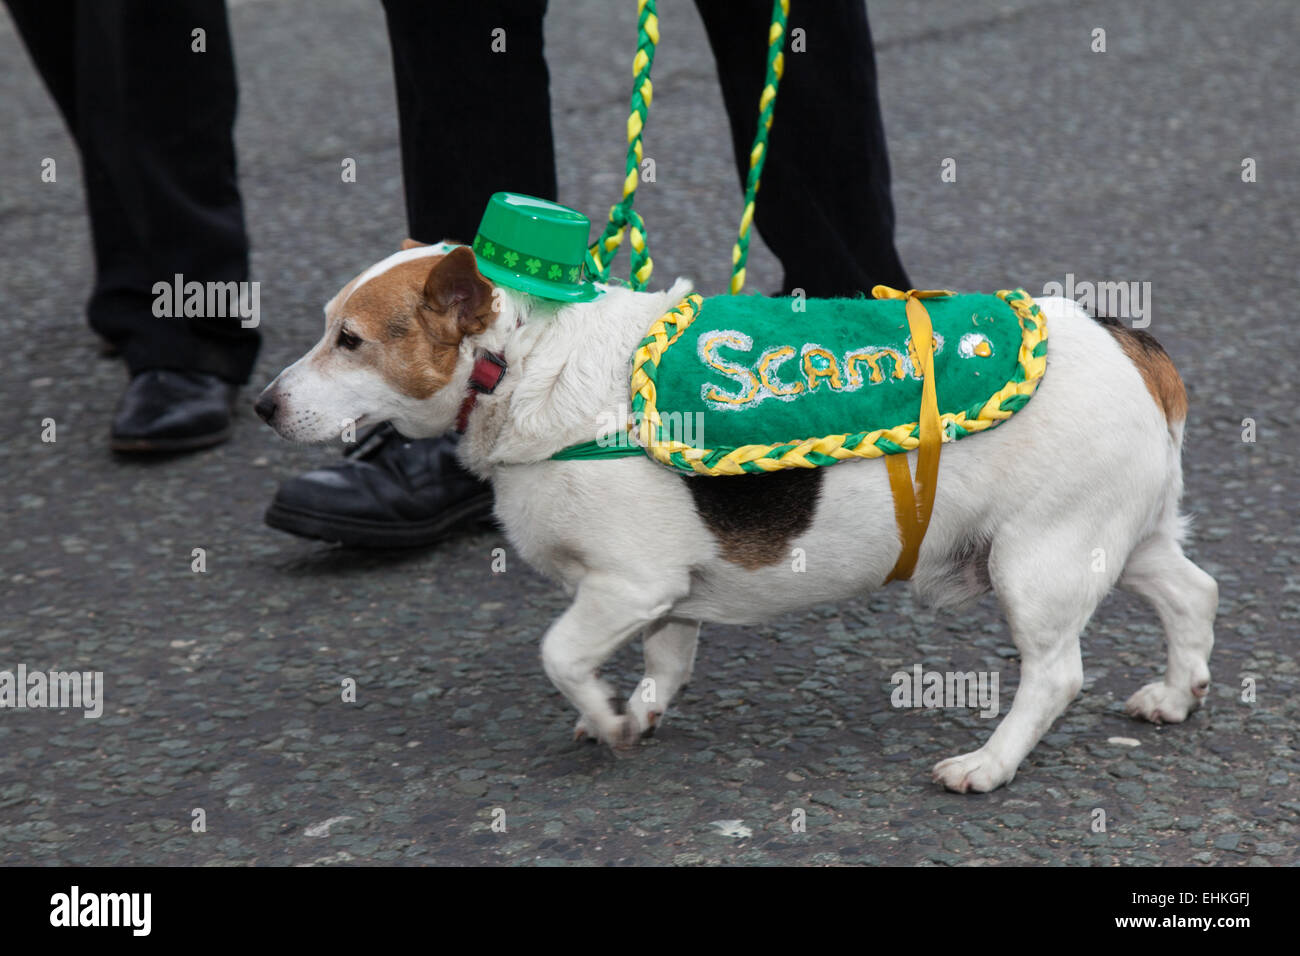 Manchester, UK 15th March, 2015.  Scamp the dog, at the St Patrick's weekend Irish Festival.  Thousands of people lined the streets to watch as the St Patrick’s Day parade made its way through Manchester.  The colourful procession set off from the Irish World Heritage Centre in Cheetham Hill before making its way to Albert Square.  Flag bearers representing the 32 counties in the Emerald Isle led the parade into the city centre, followed by floats from the city’s Irish associations. Stock Photo